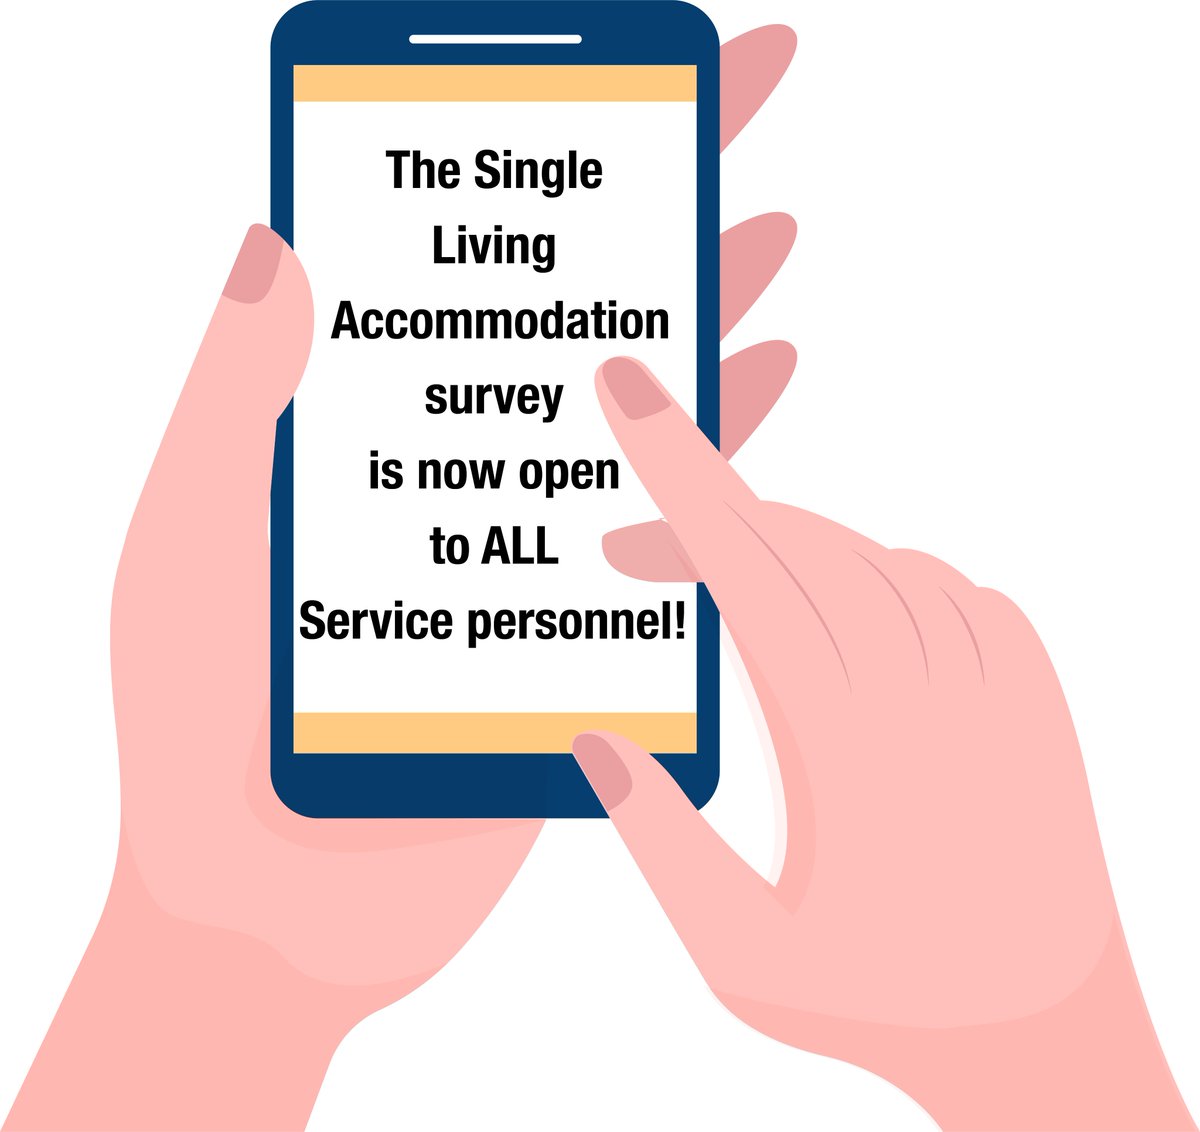 The MOD needs to hear from you! The Single Living Accommodation survey is now open to all Service personnel. Share your views and help shape the future of Single Living Accommodation: surveys.mod.uk/index.php/5292…